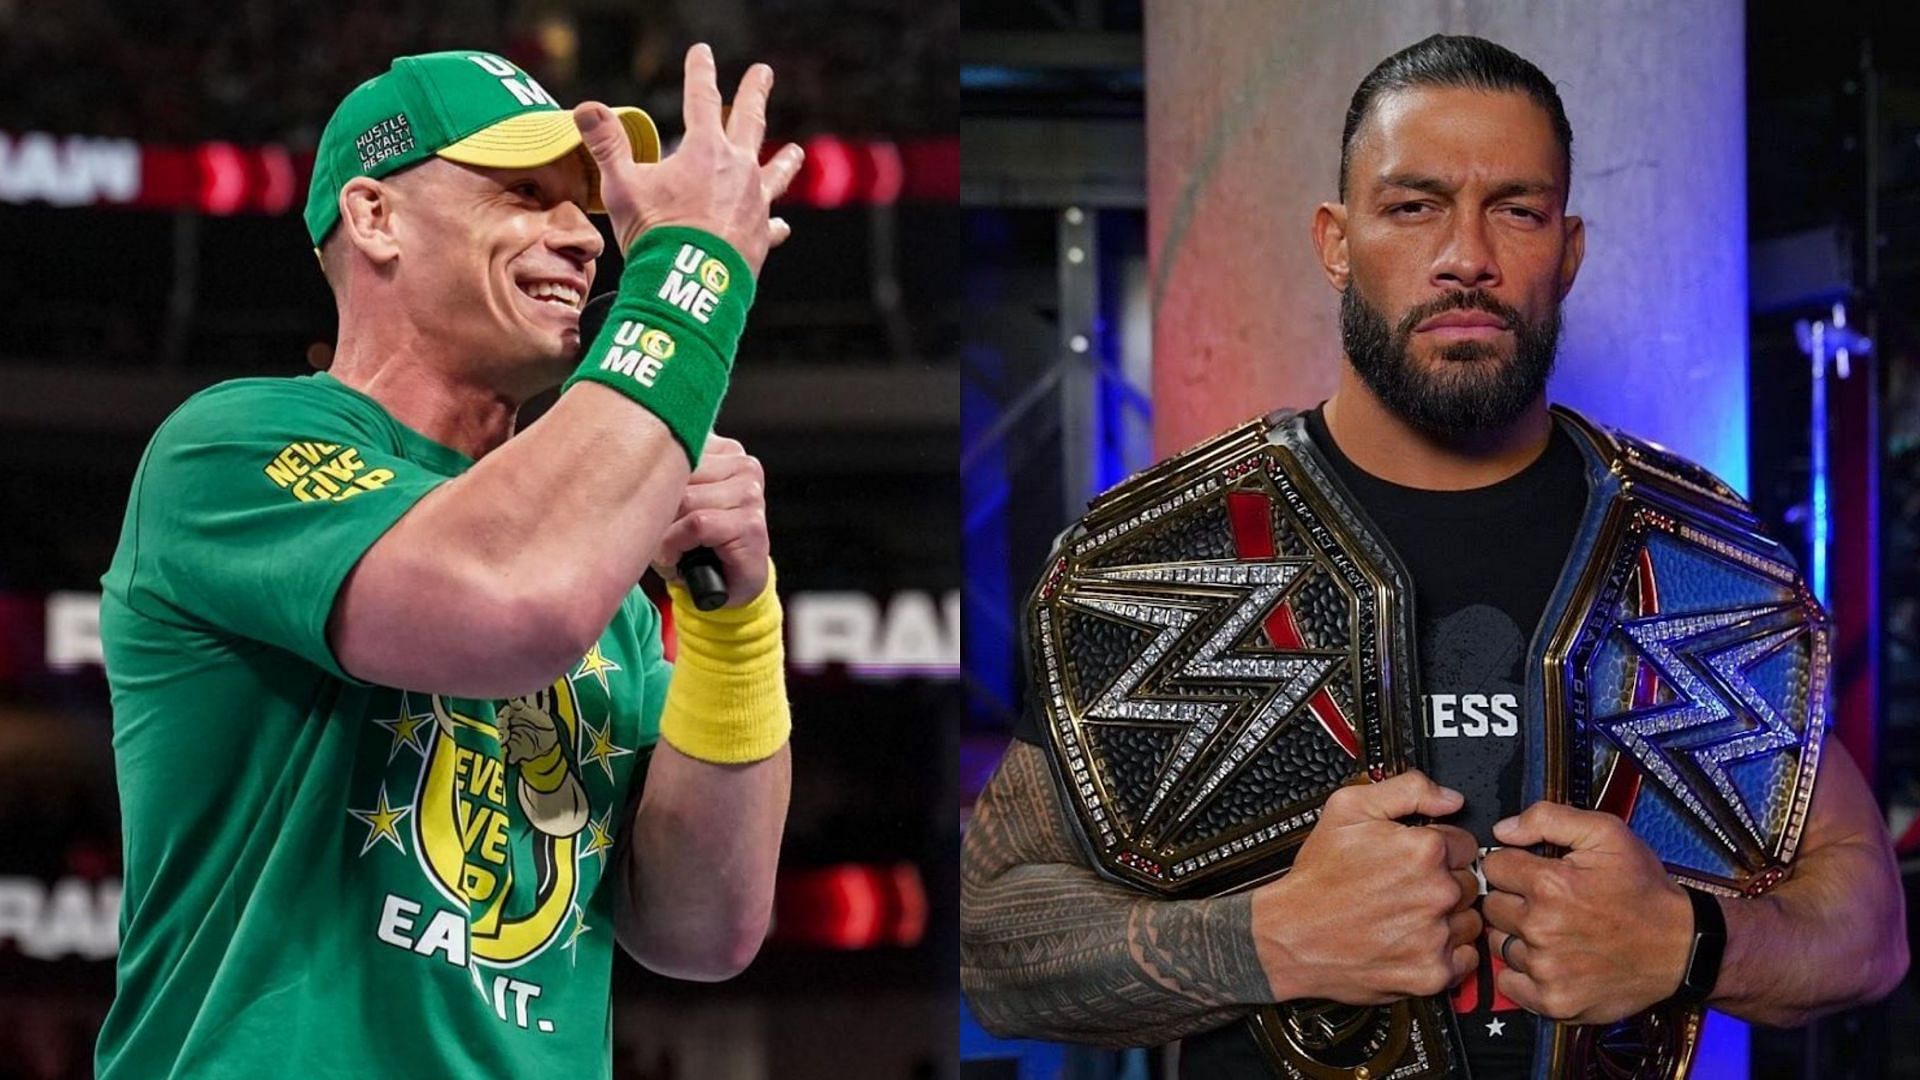 John Cena (left) and Undisputed WWE Universal Champion Roman Reigns (right)